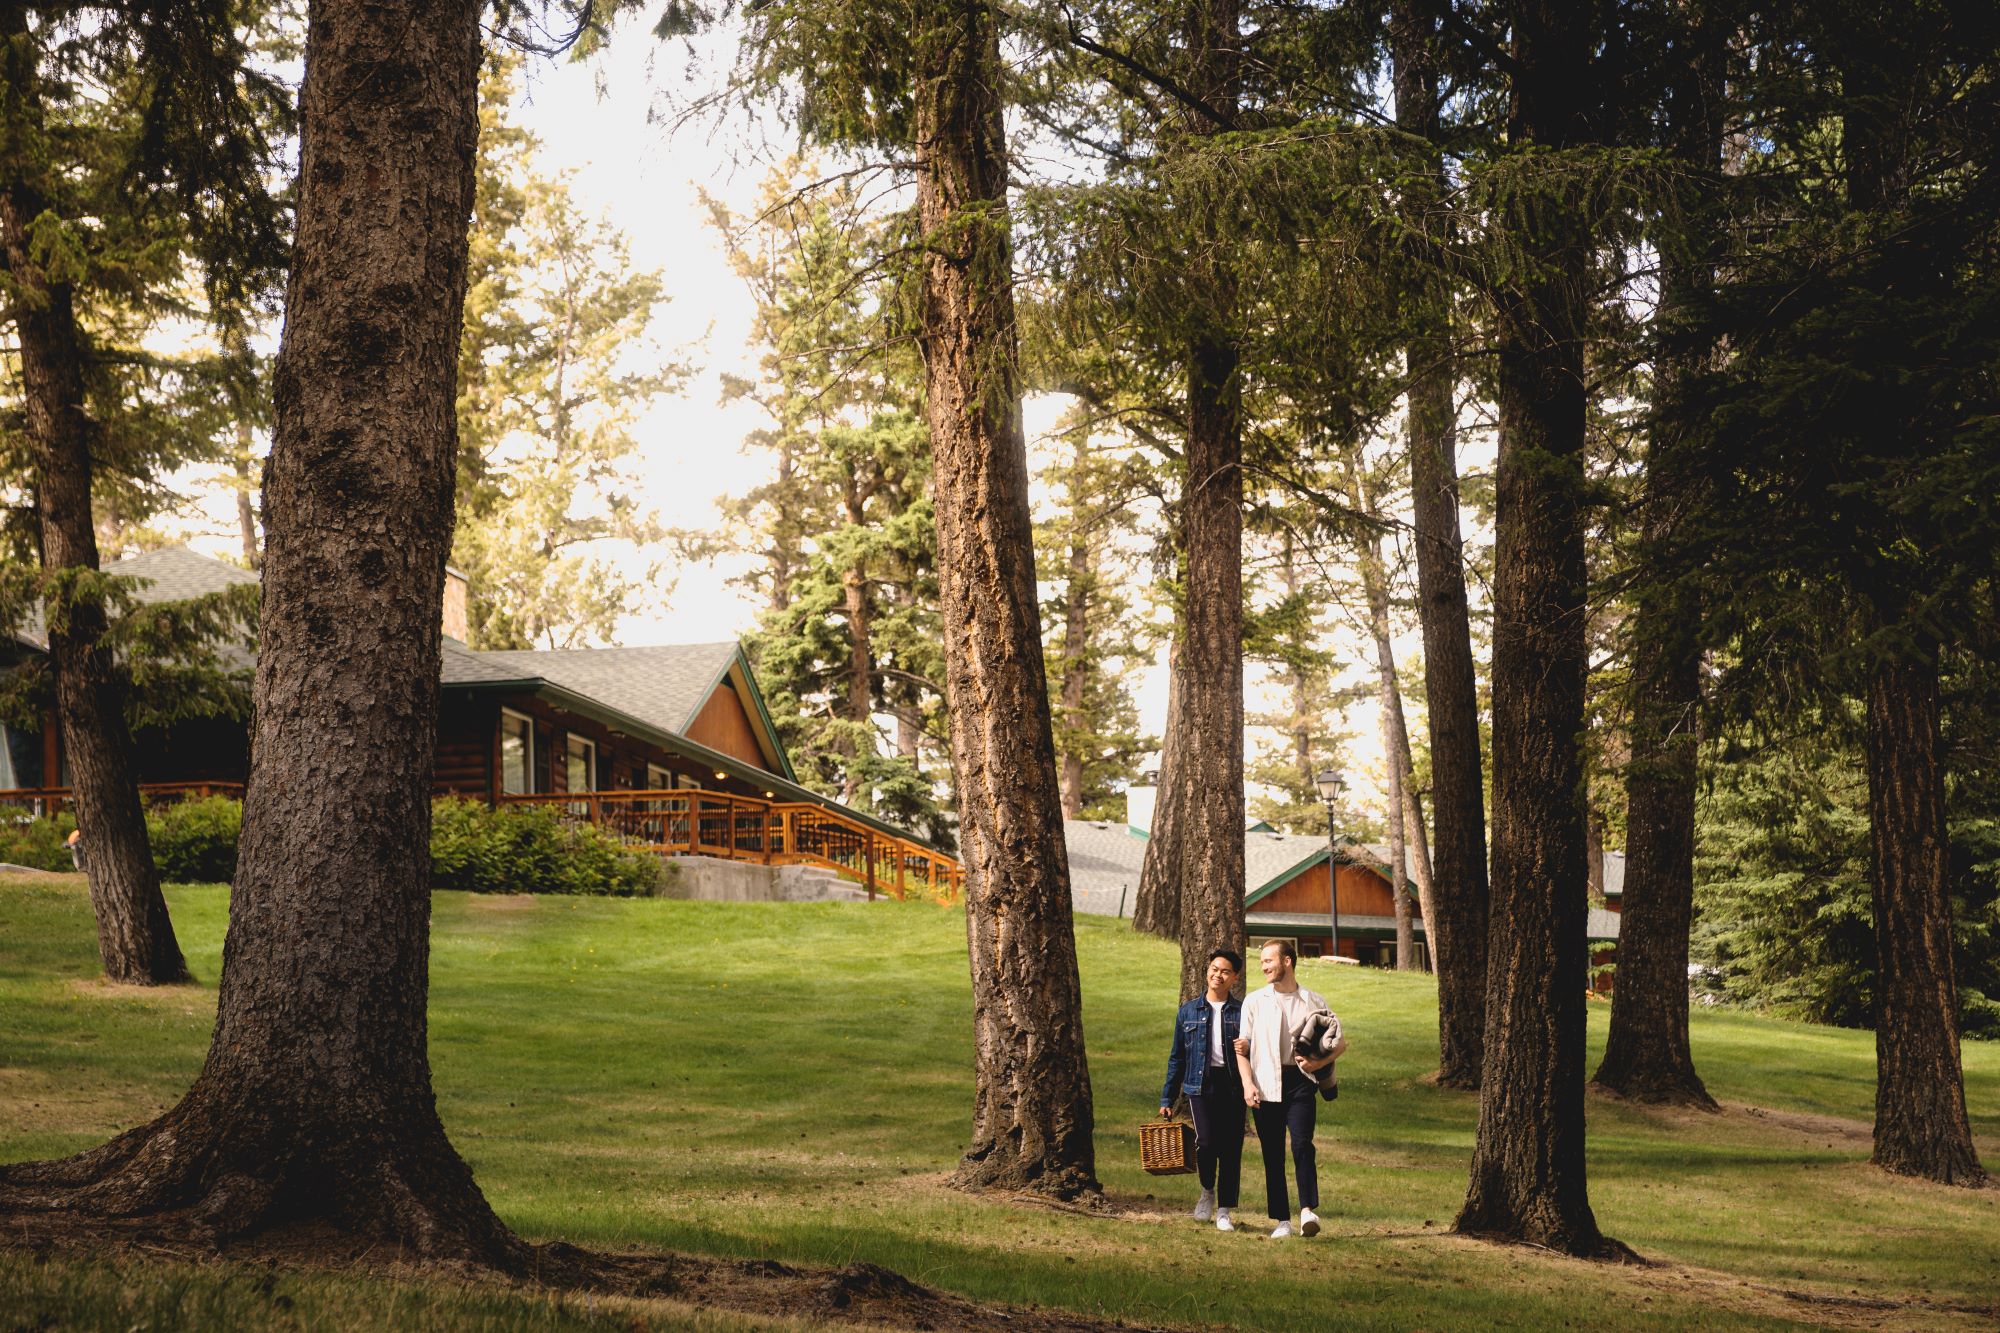 A couple walking through the forest for a picnic at Fairmont Jasper Park Lodge